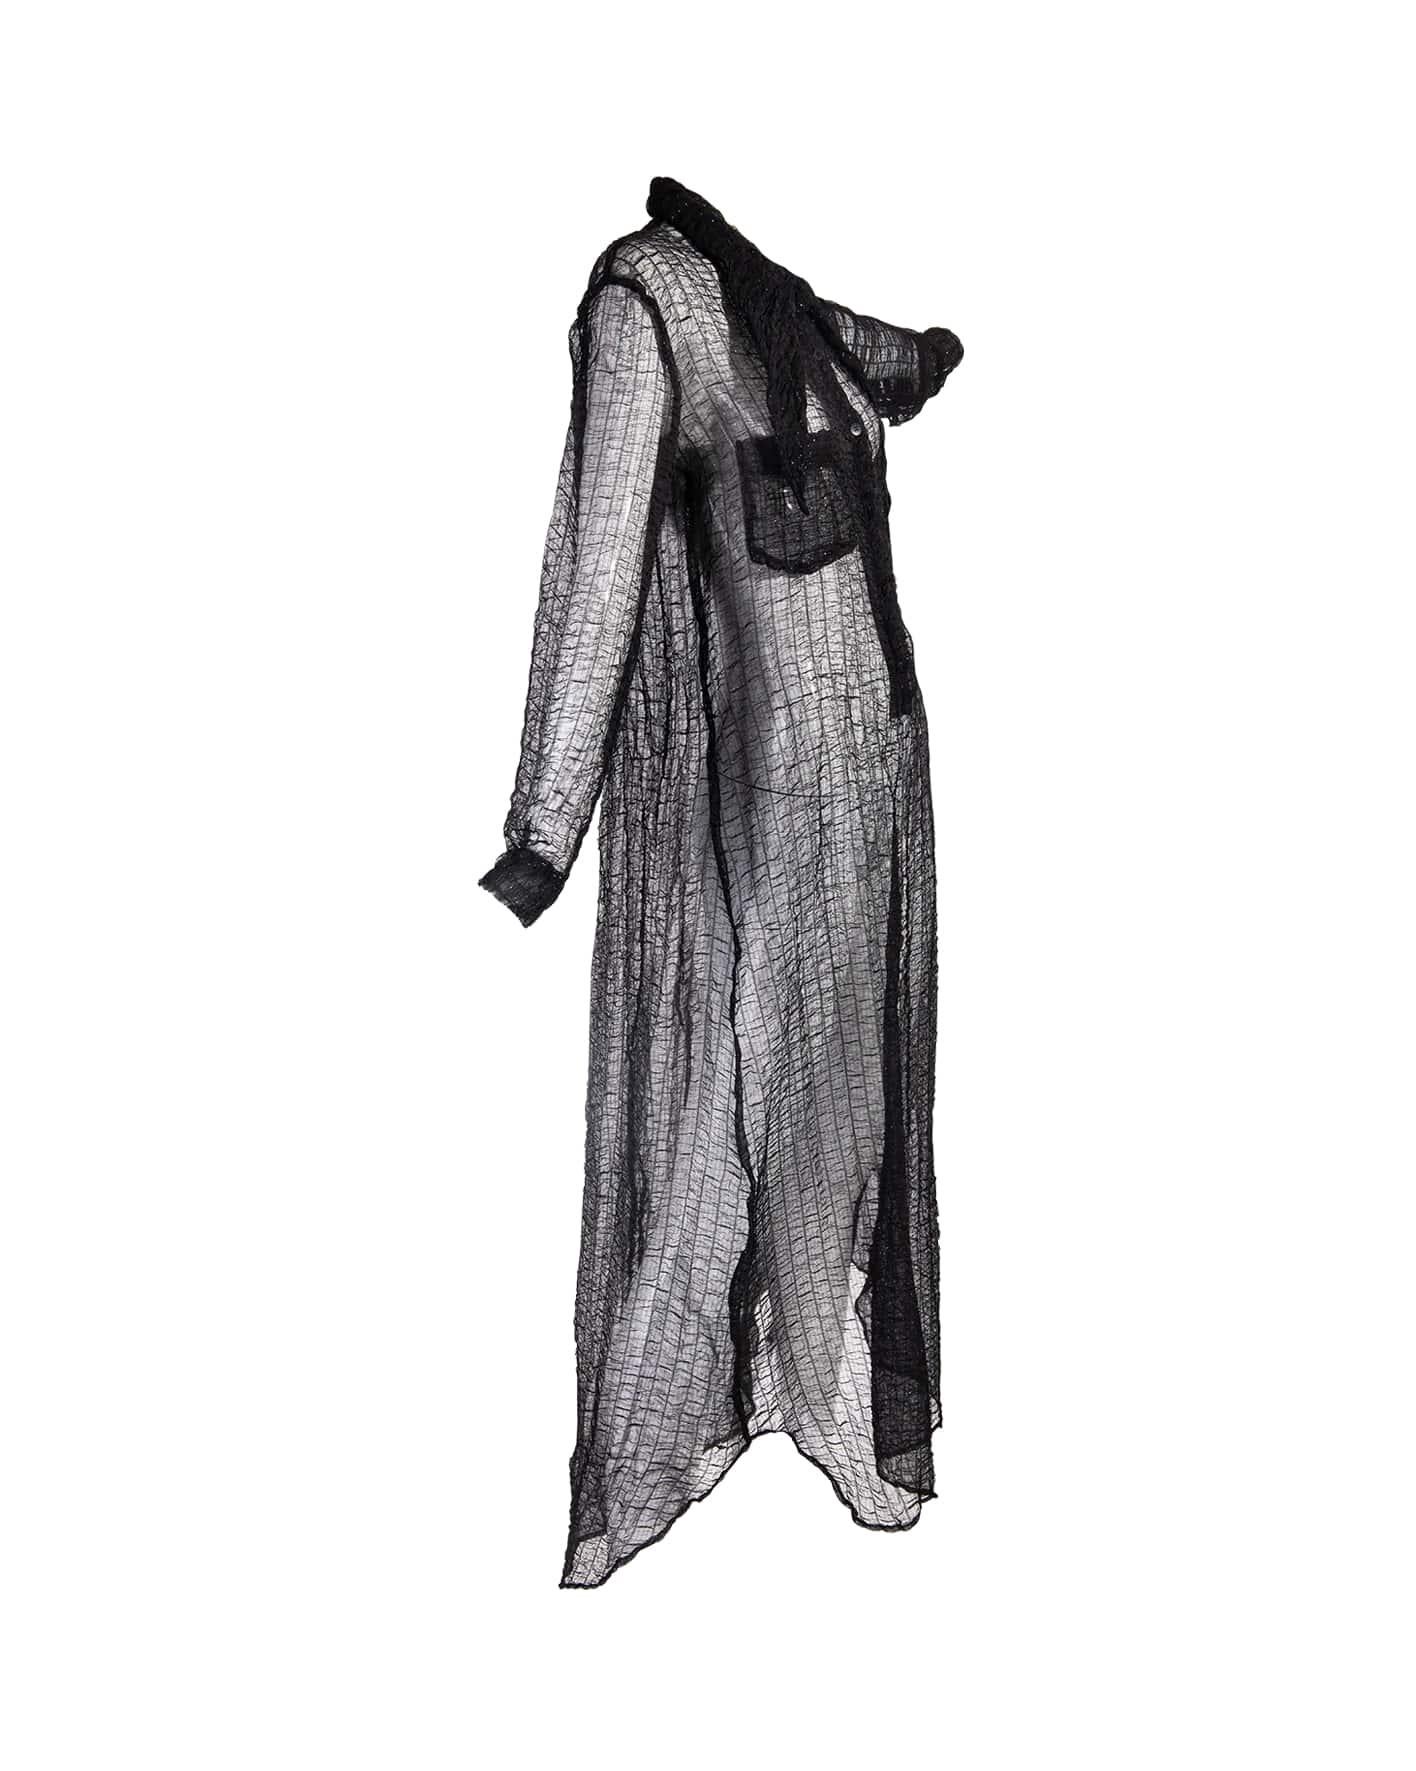 1990's Issey Miyake black semi-sheer metallic dress with long, oversized pointed collar. Button-up dress with ruched crinkle pleat fabric throughout. 
